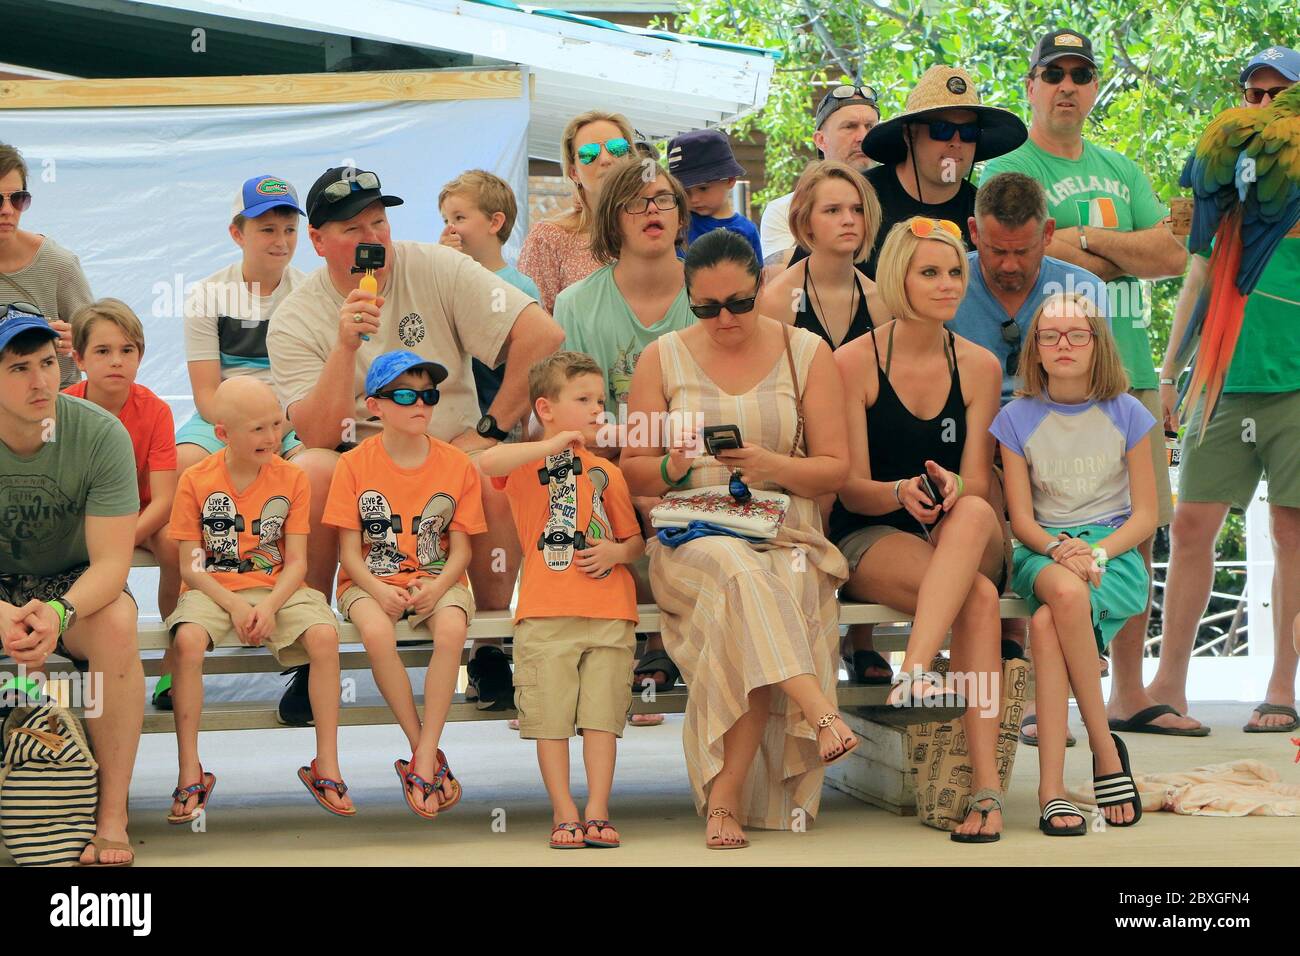 Islamorada, FL, 3/17/2020: Spectators sit and watch a parrot show at the Theater of the Sea marine park. Stock Photo